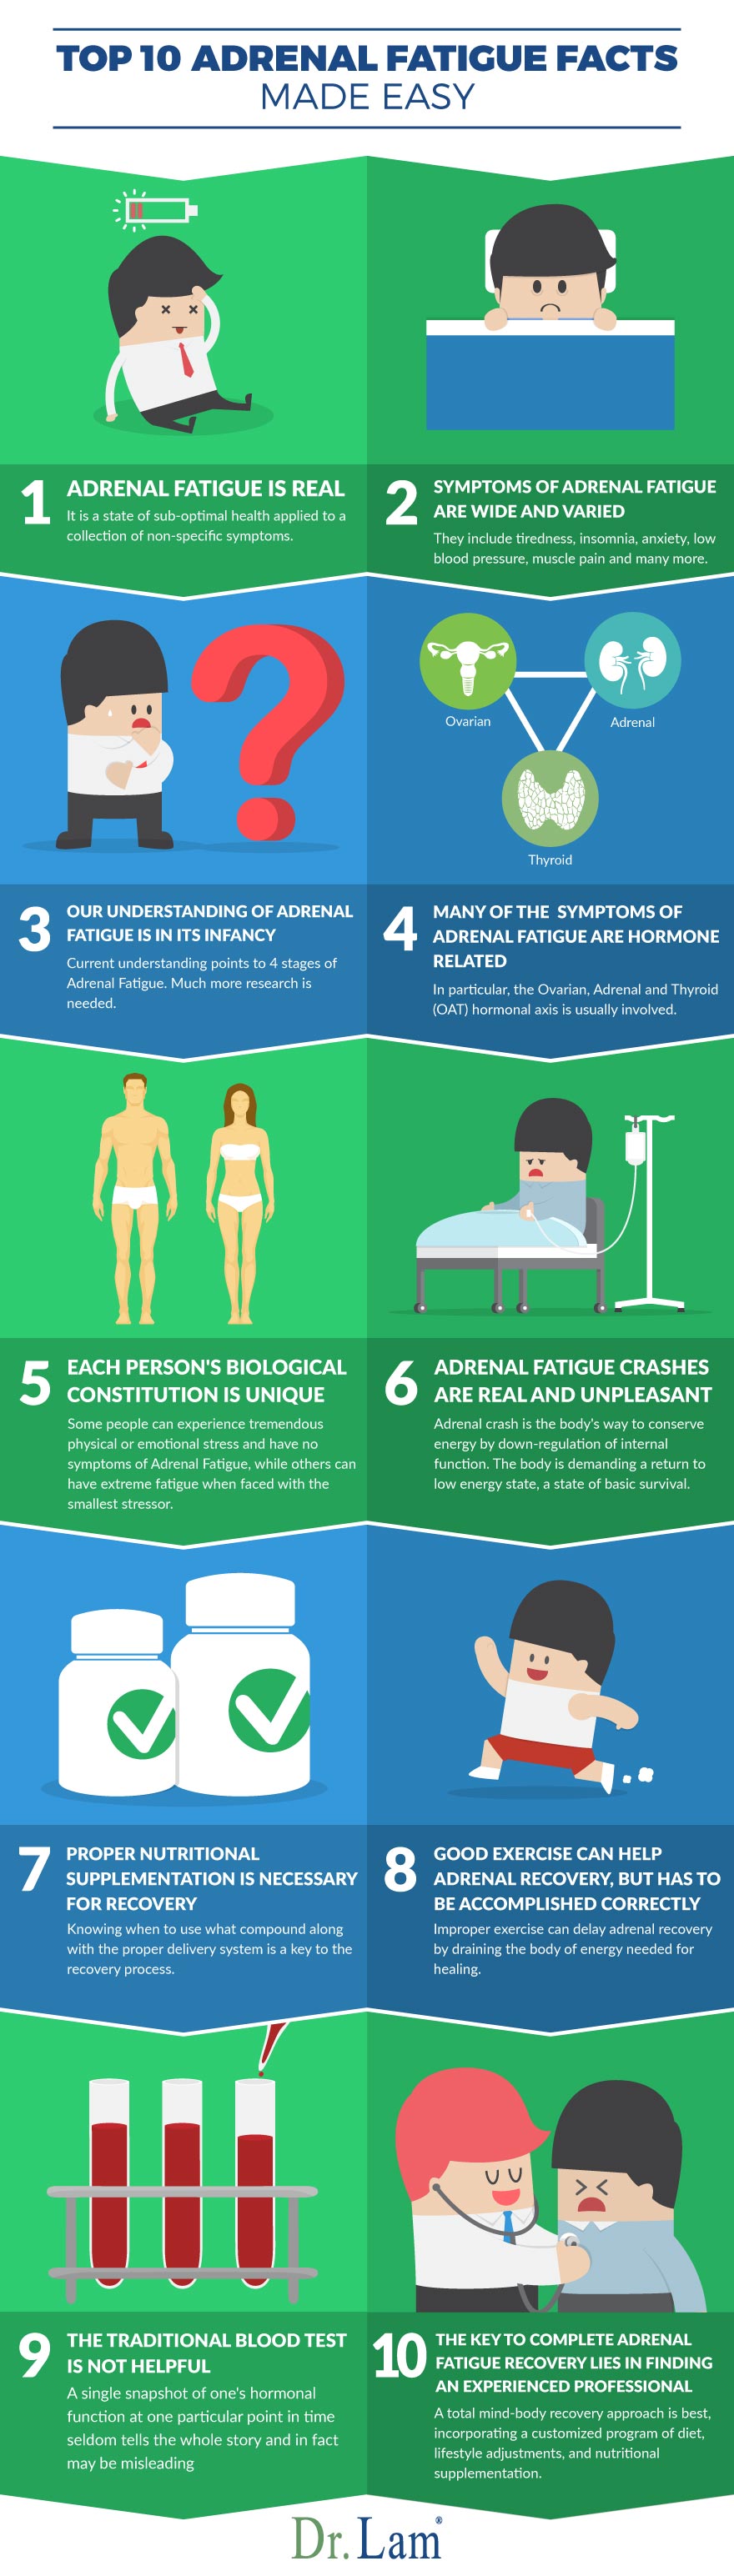 Check out this easy to understand infographic about what is Adrenal Fatigue facts